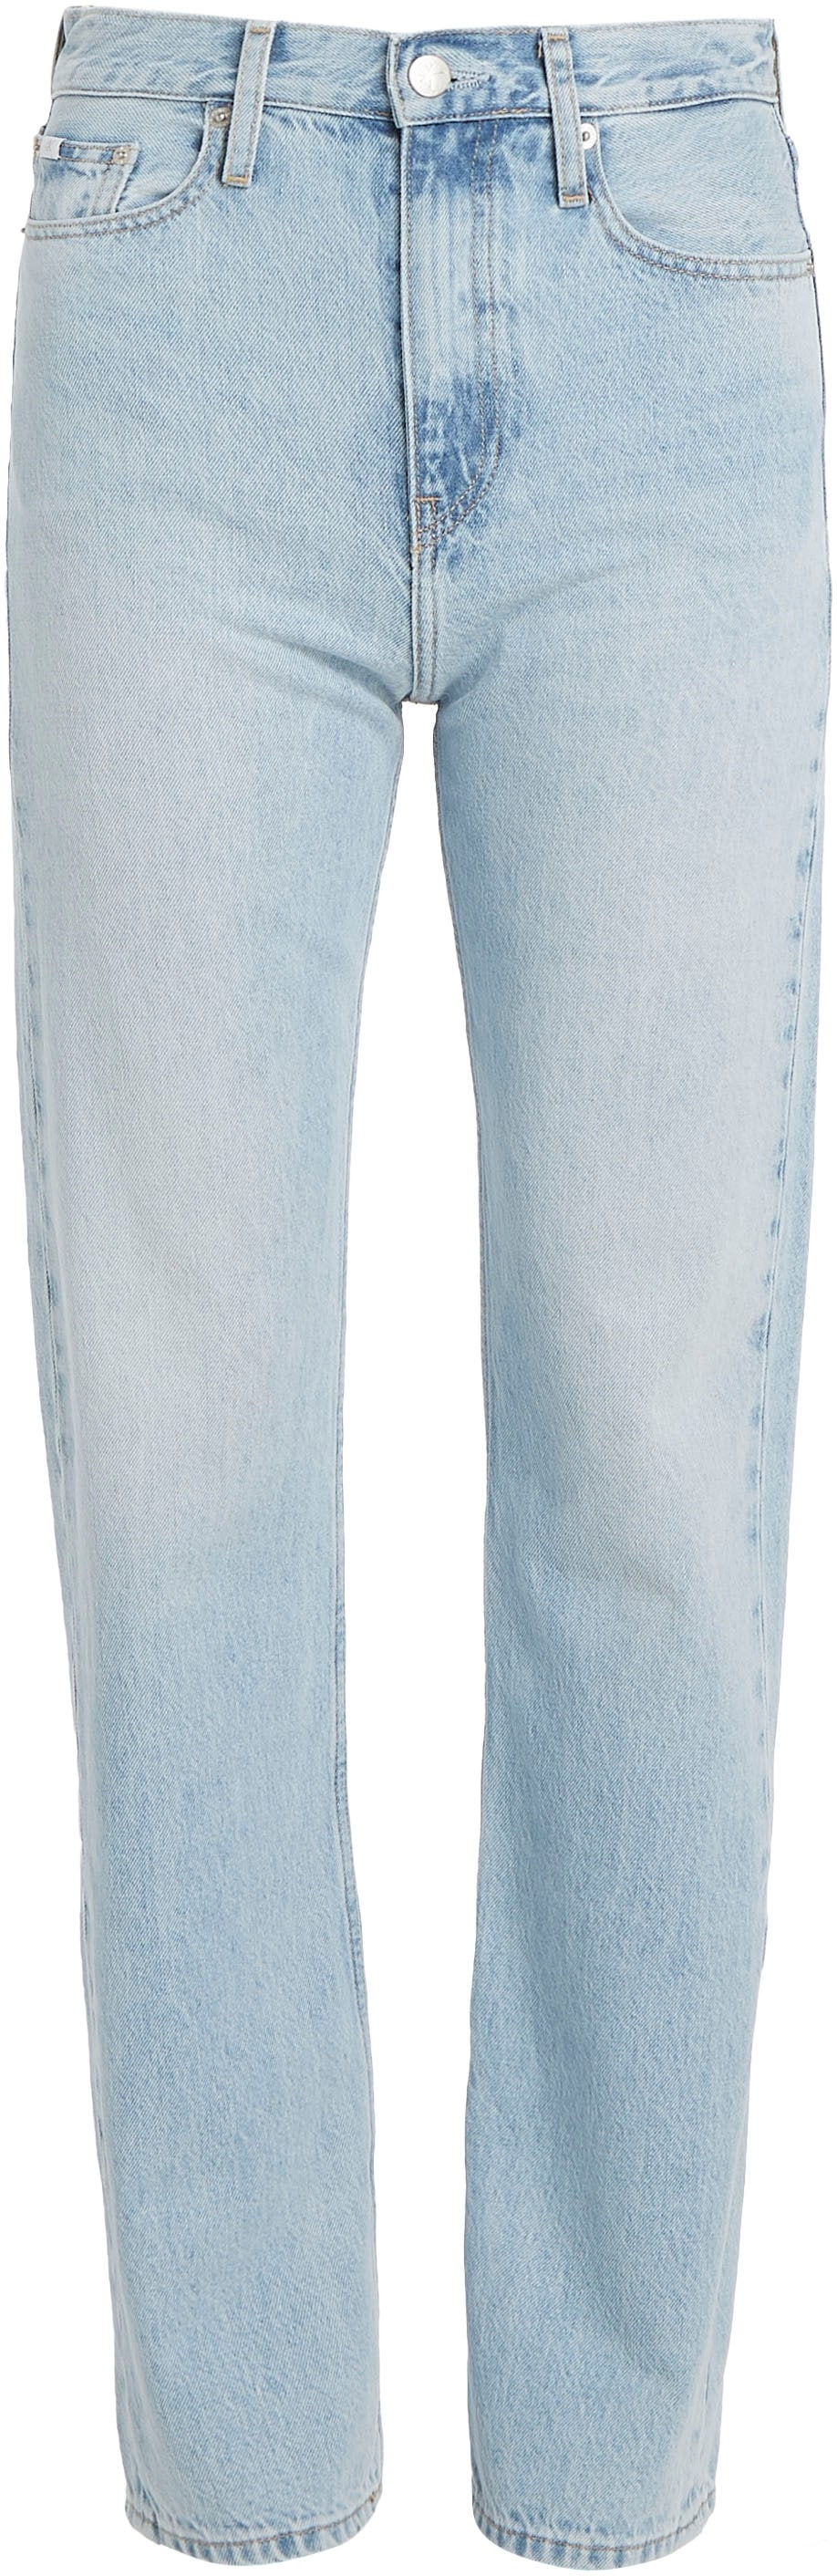 STRAIGHT«, ♕ Straight-Jeans 5-Pocket-Style im Calvin »HIGH bei Klein RISE Jeans